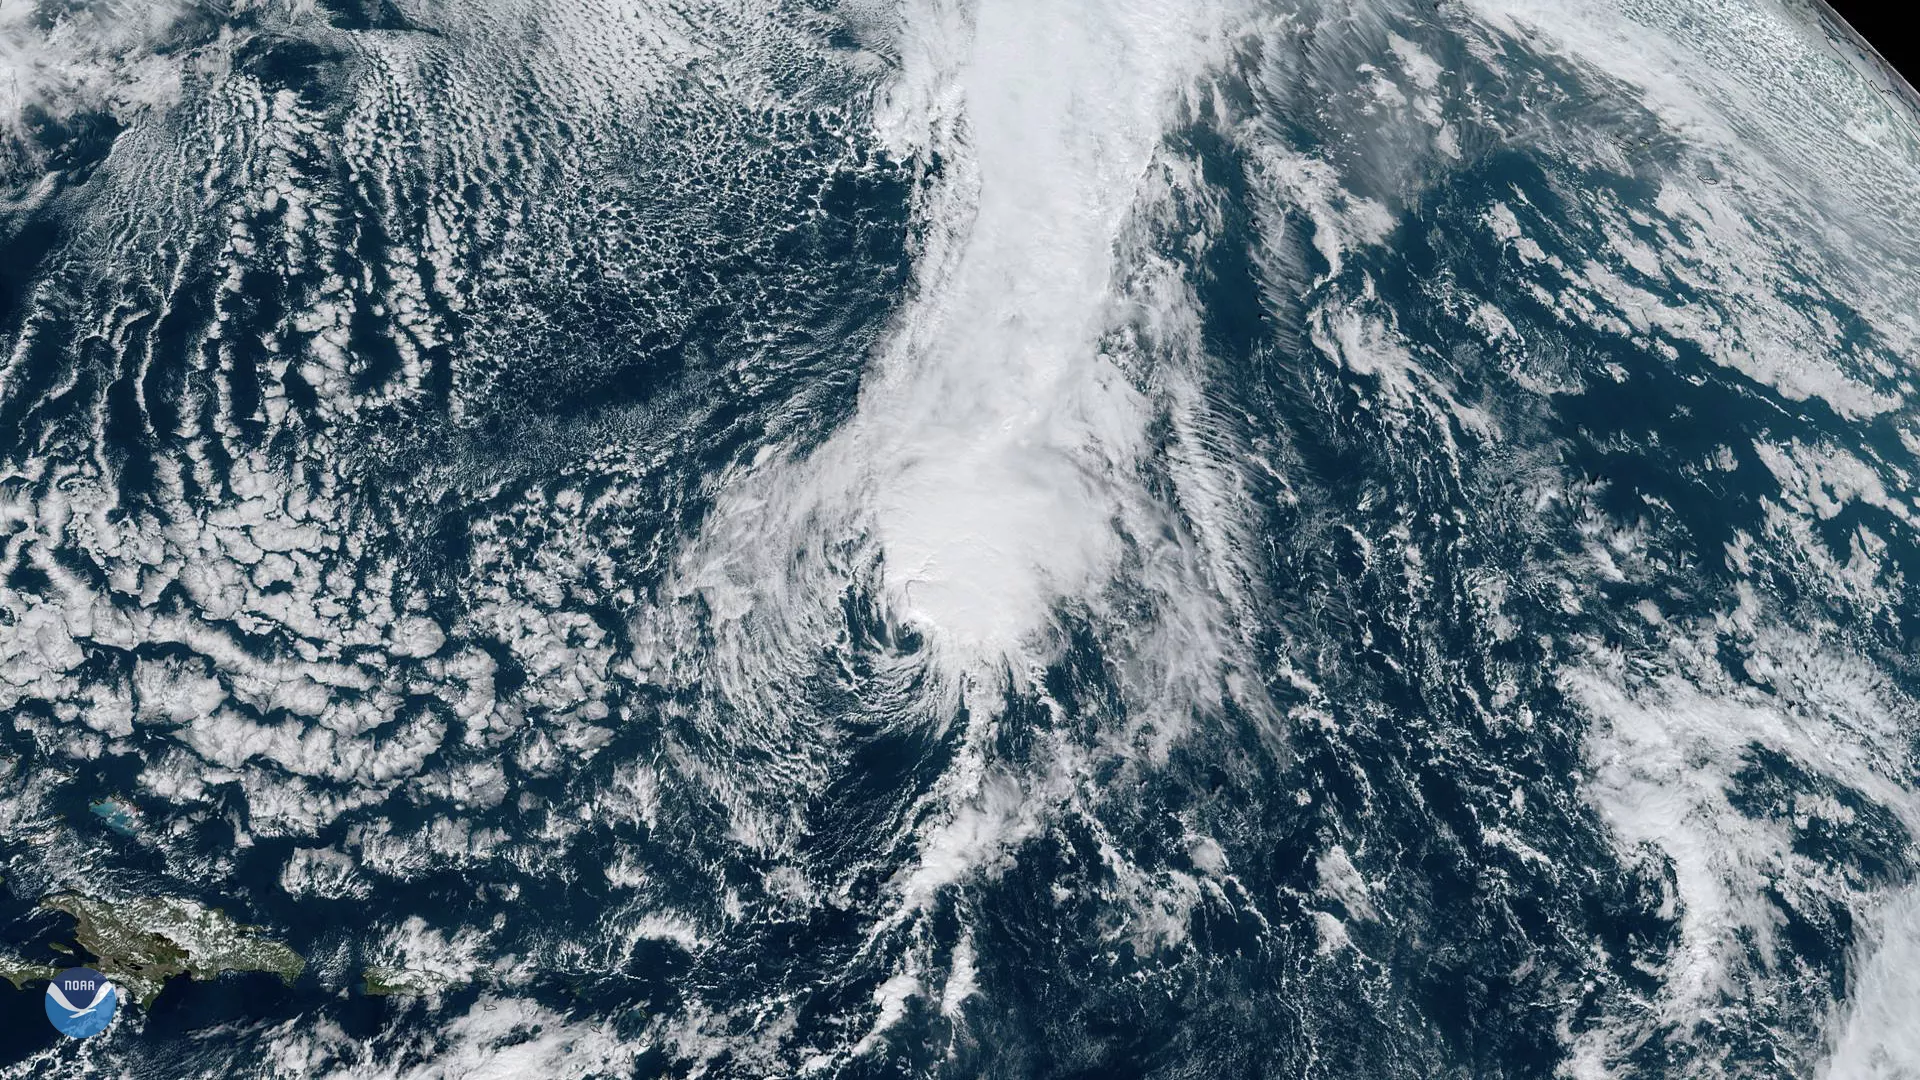 GOES East view of Tropical Storm Sebastien, which had a shallow and disorganized structure, on Nov. 22, 2019.